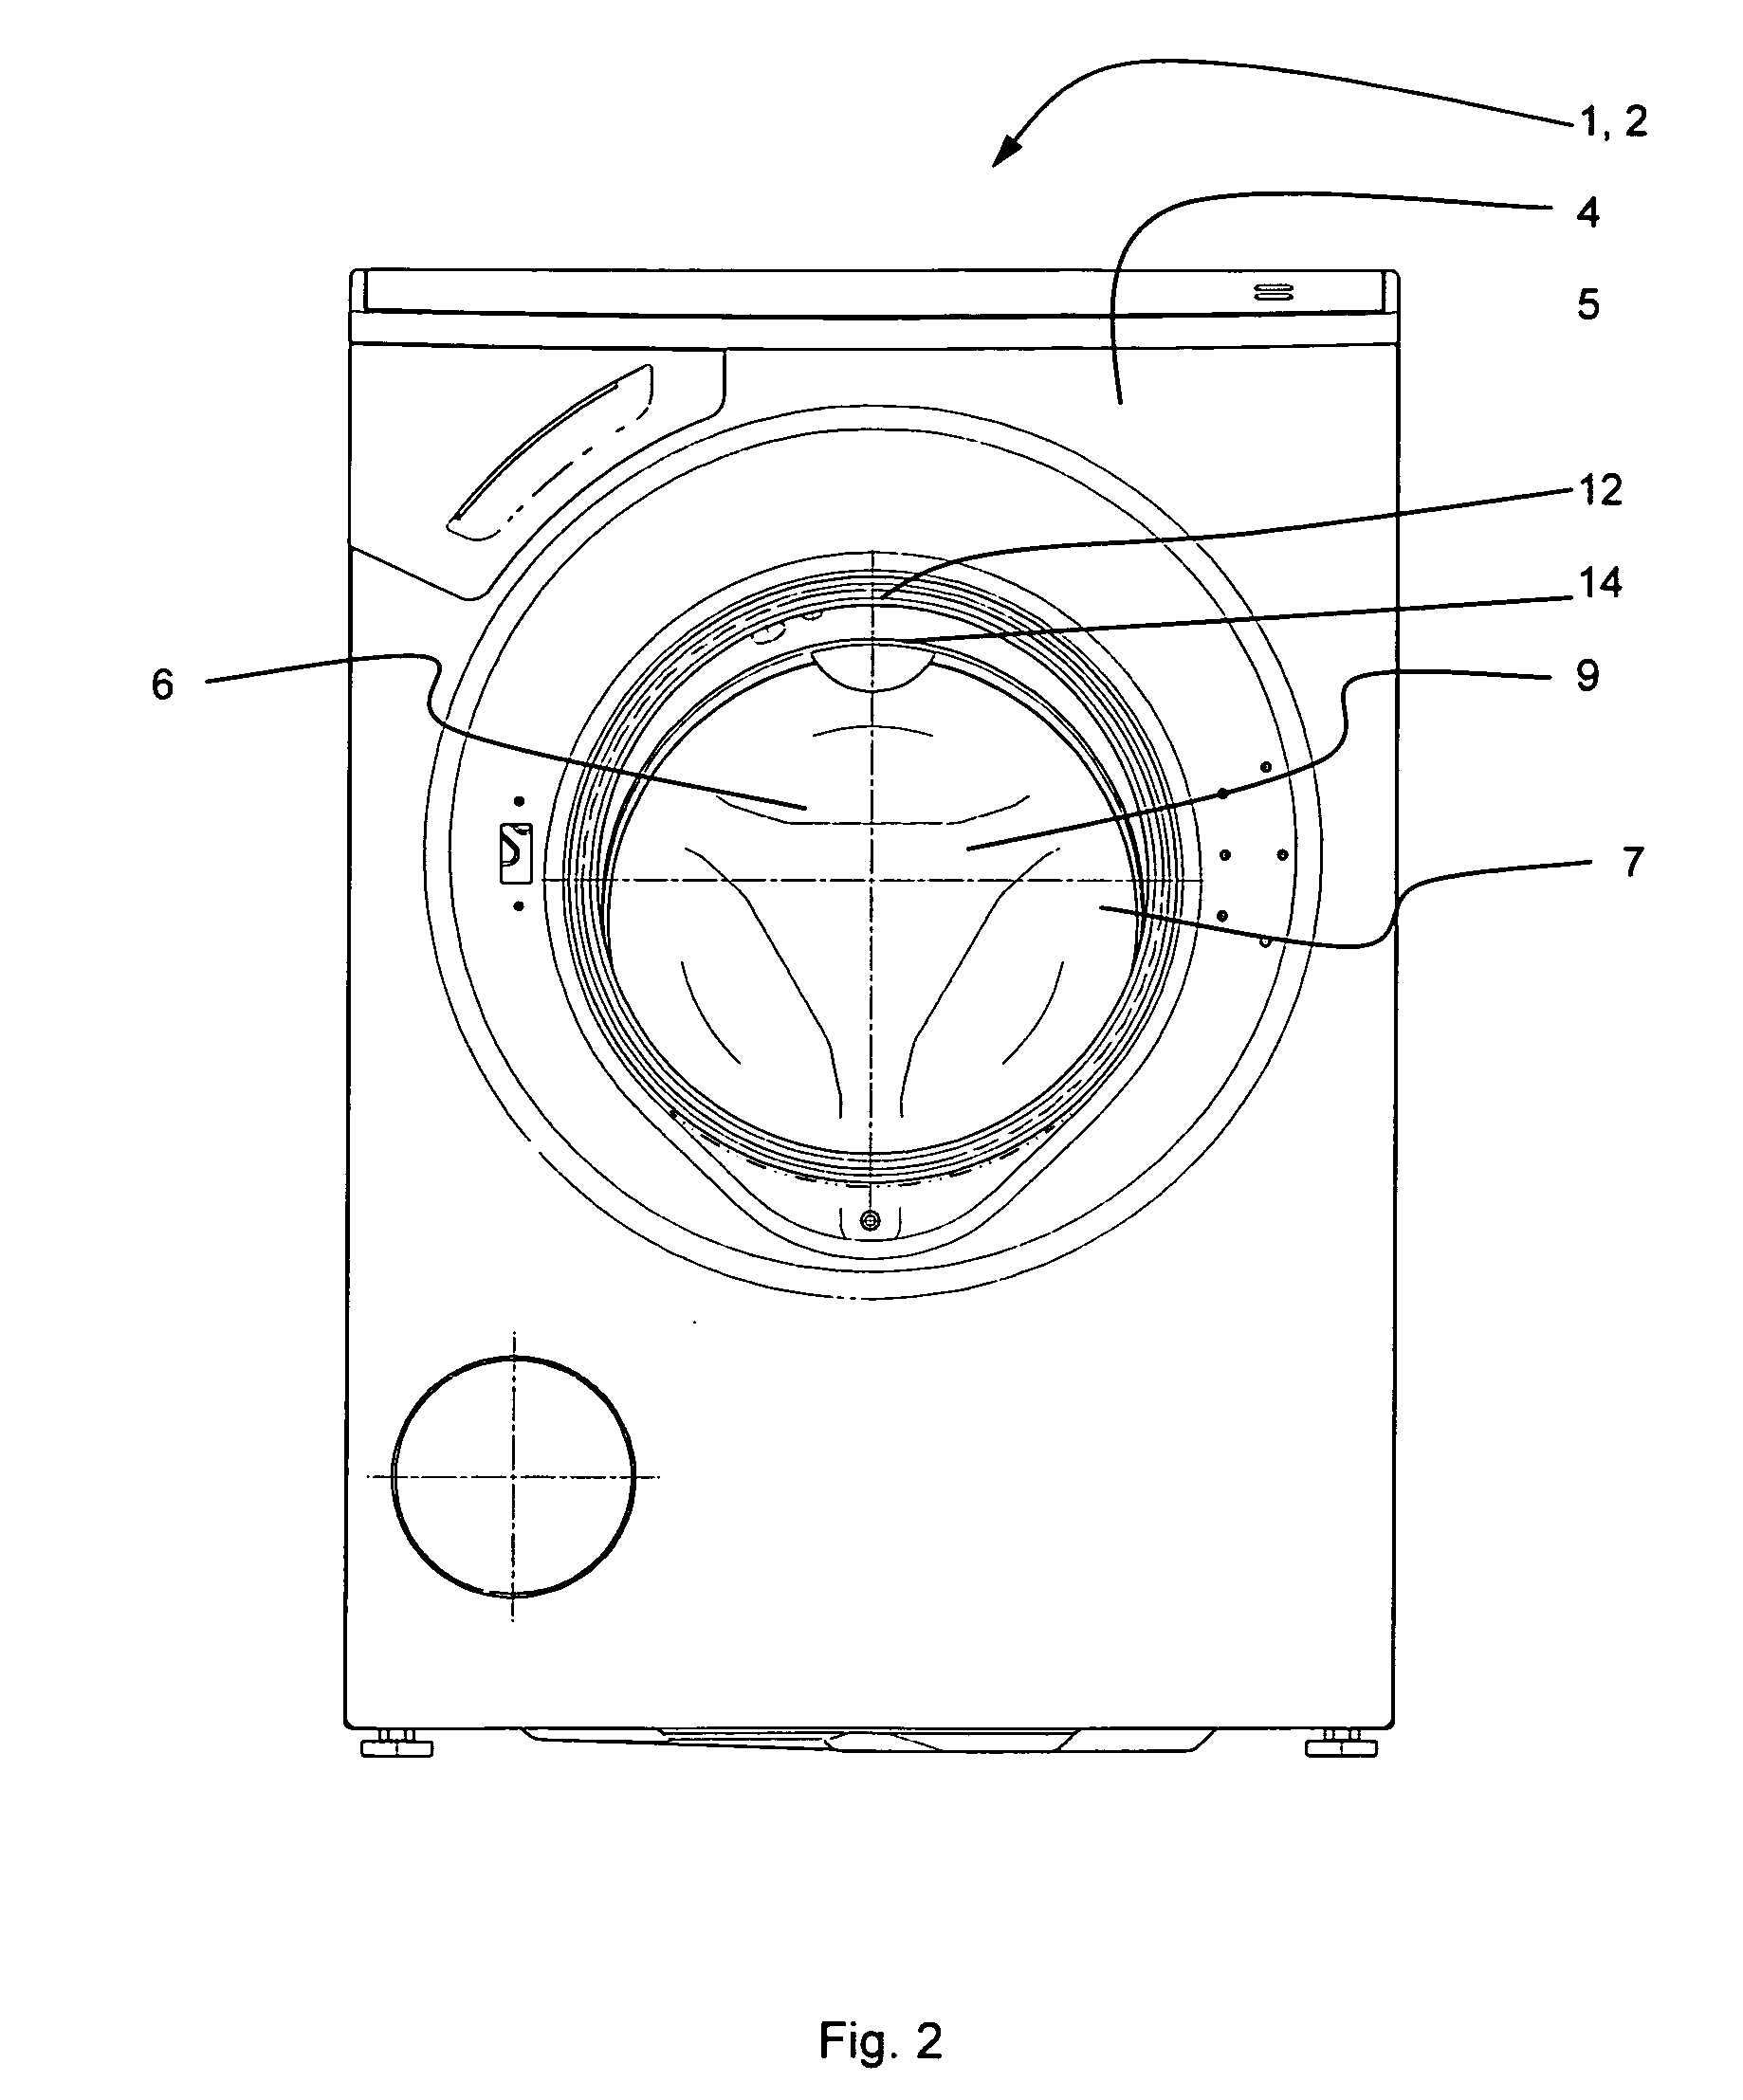 Front-loading laundry appliance such as a washing machine, a laundry dryer or a washer-dryer machine